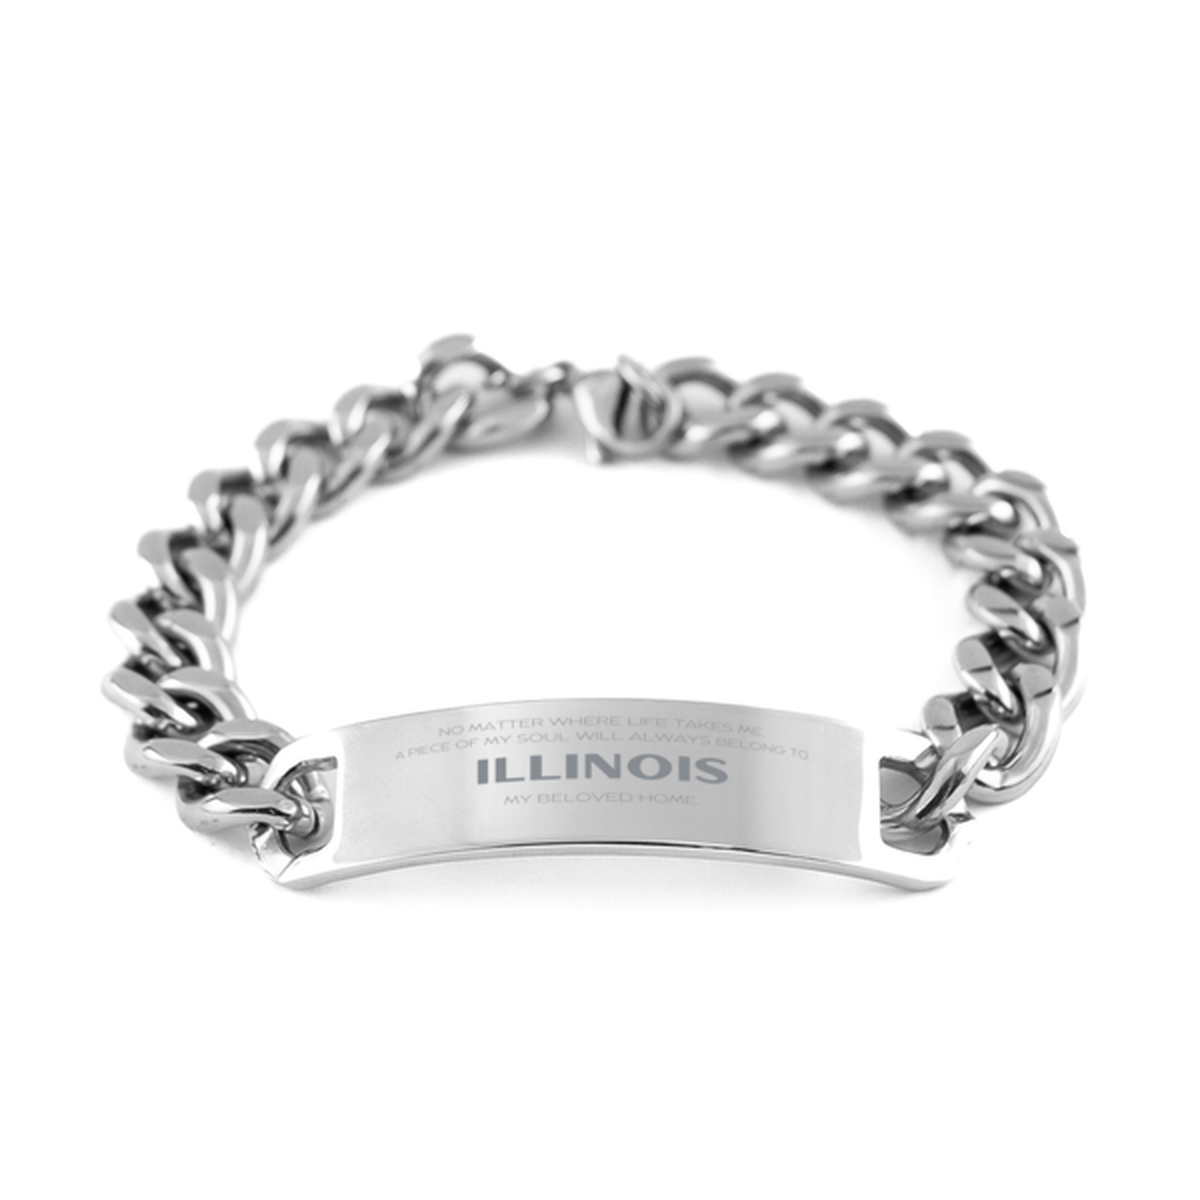 Love Illinois State Gifts, My soul will always belong to Illinois, Proud Cuban Chain Stainless Steel Bracelet, Birthday Unique Gifts For Illinois Men, Women, Friends